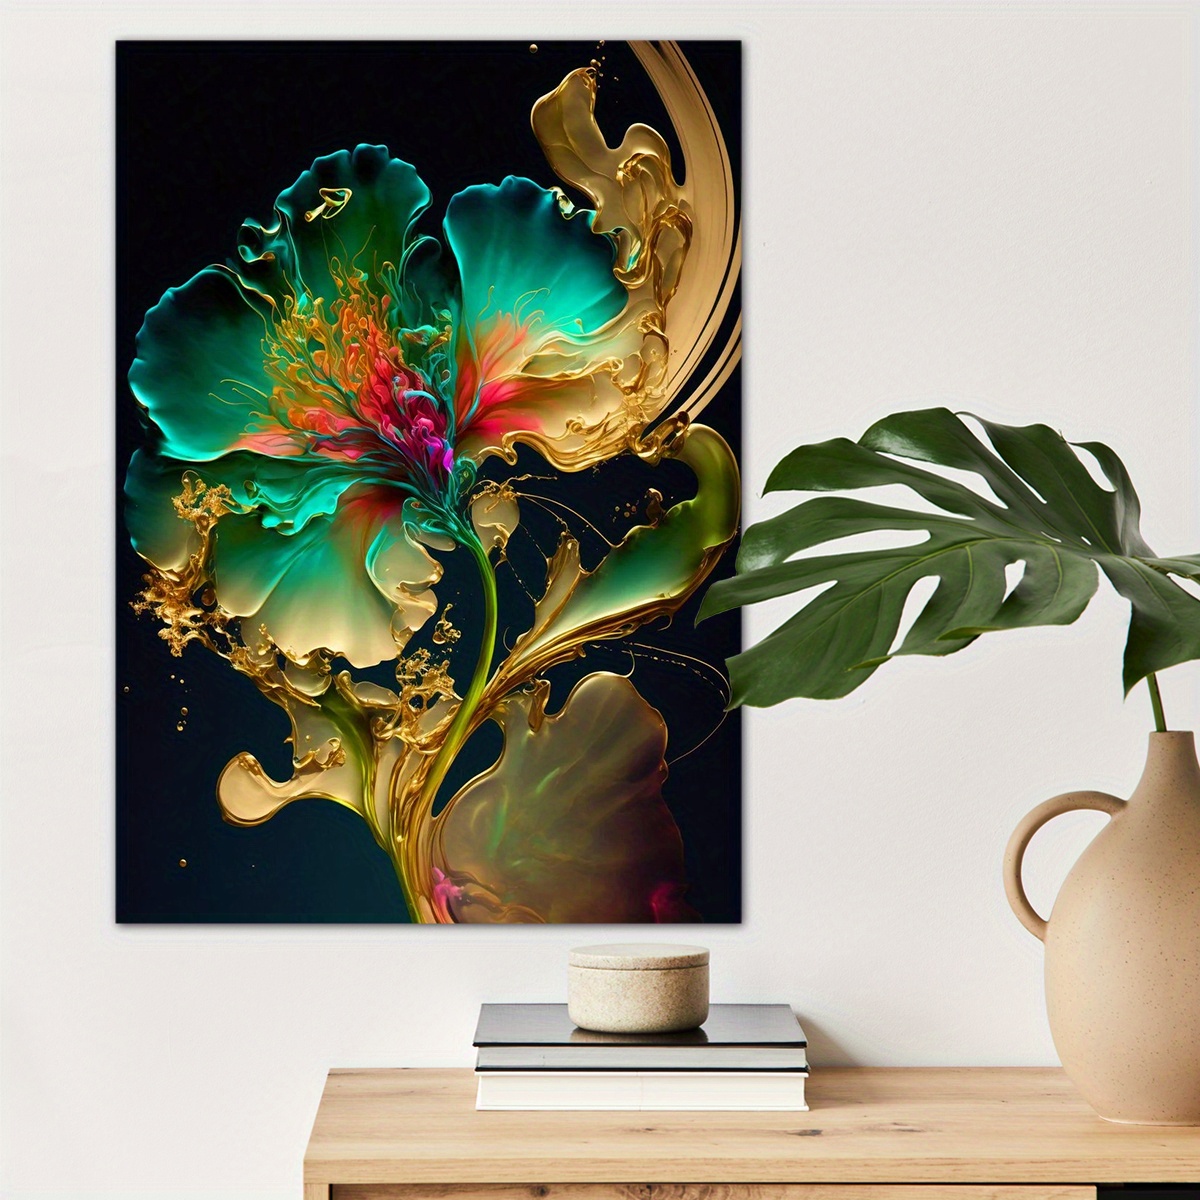 

1pc Abstract Flower Canvas Wall Art For Home Decor, High Quality Wall Decor, Canvas Prints For Living Room Bedroom Bathroom Kitchen Office Cafe Decor, Perfect Gift And Decoration